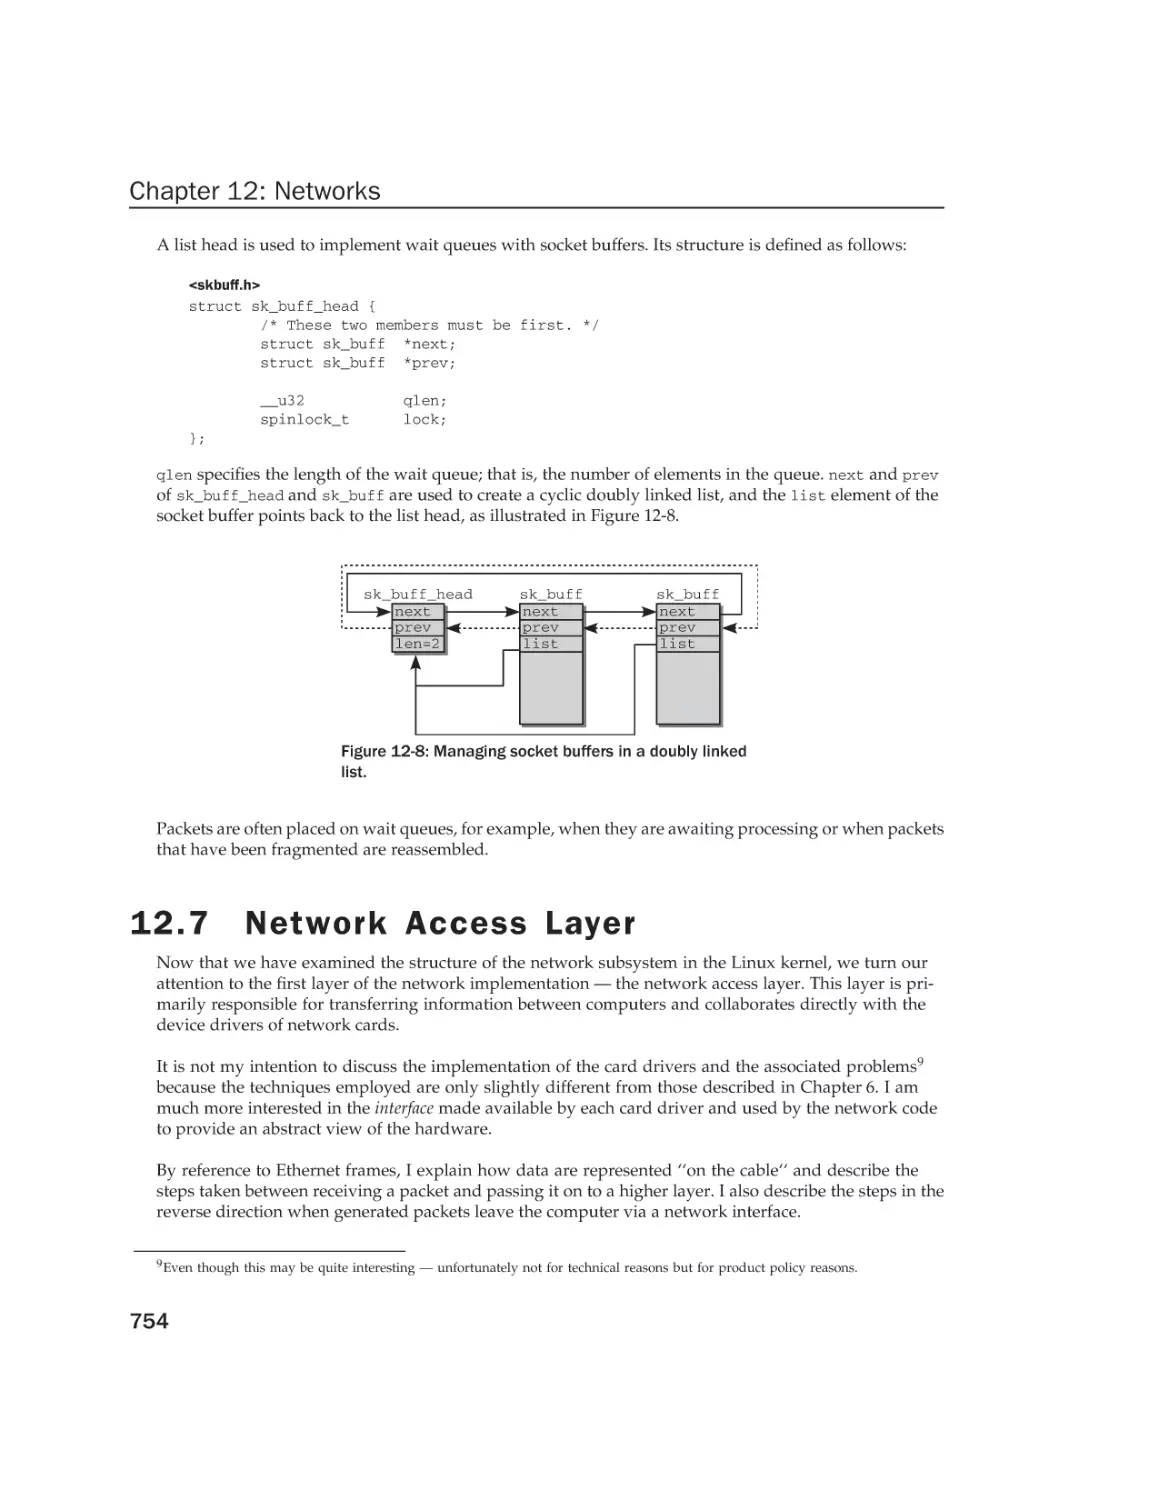 12.7 Network Access Layer